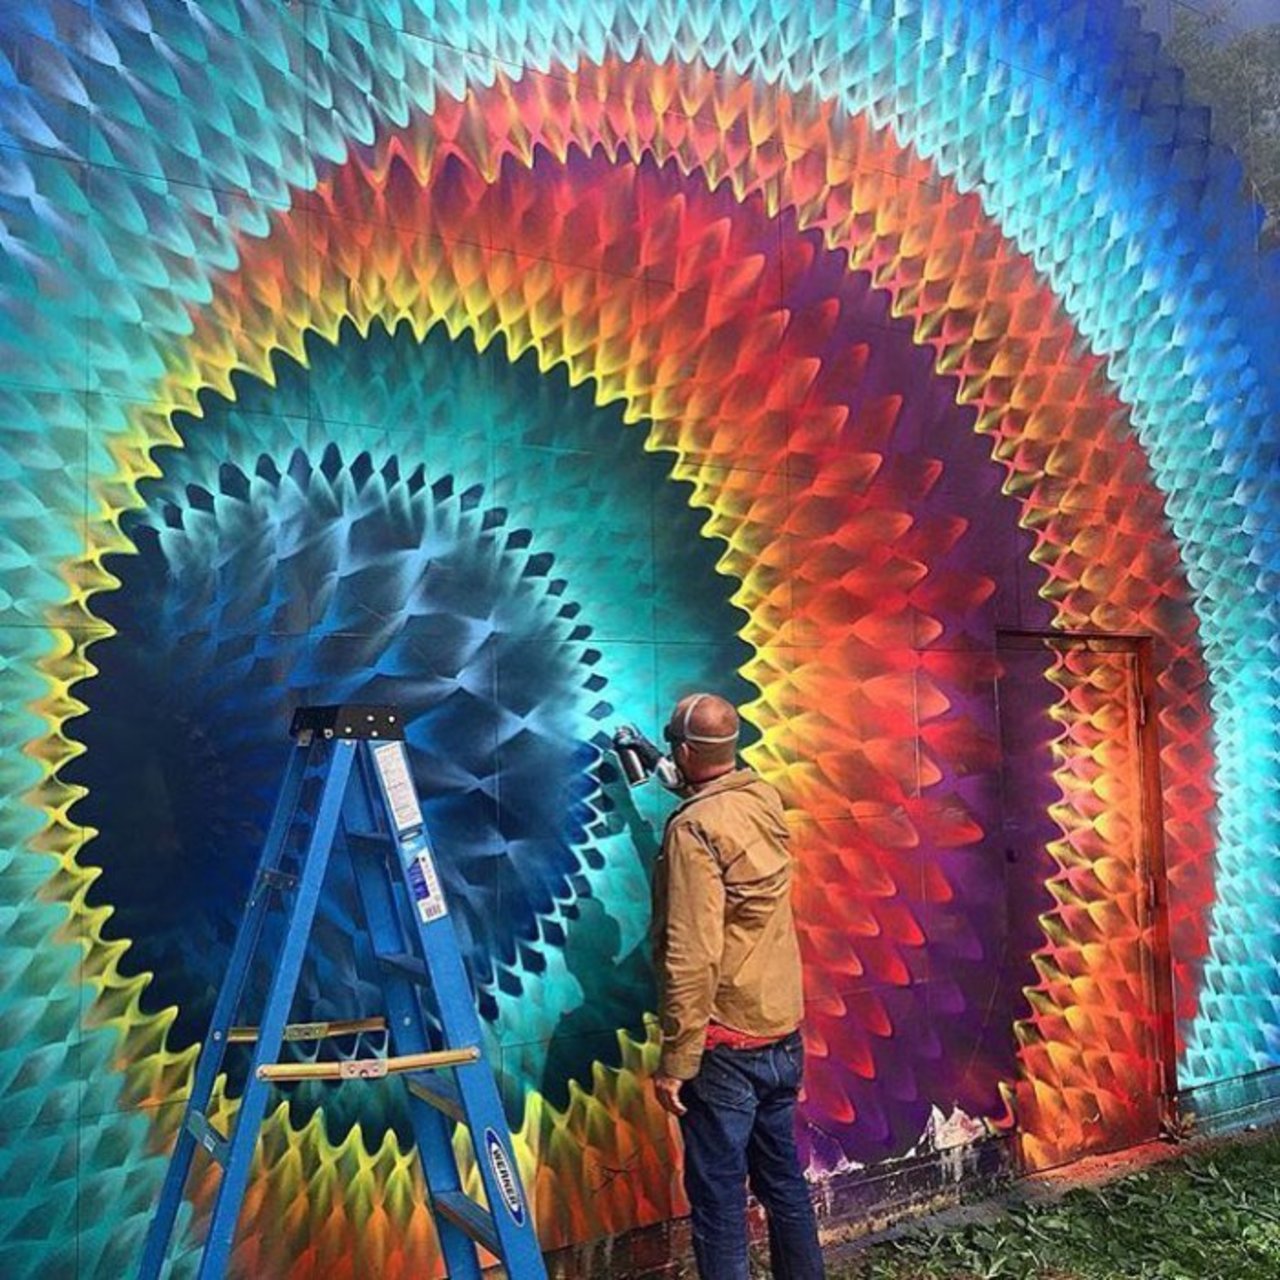 #StreetArt Rainbow – Creative Colours | Be ▲rtist - Be ▲rt https://beartistbeart.com/2016/06/23/streetart-rainbow-creative-colours/?utm_campaign=crowdfire&utm_content=crowdfire&utm_medium=social&utm_source=twitter https://t.co/leY0AI0nsk